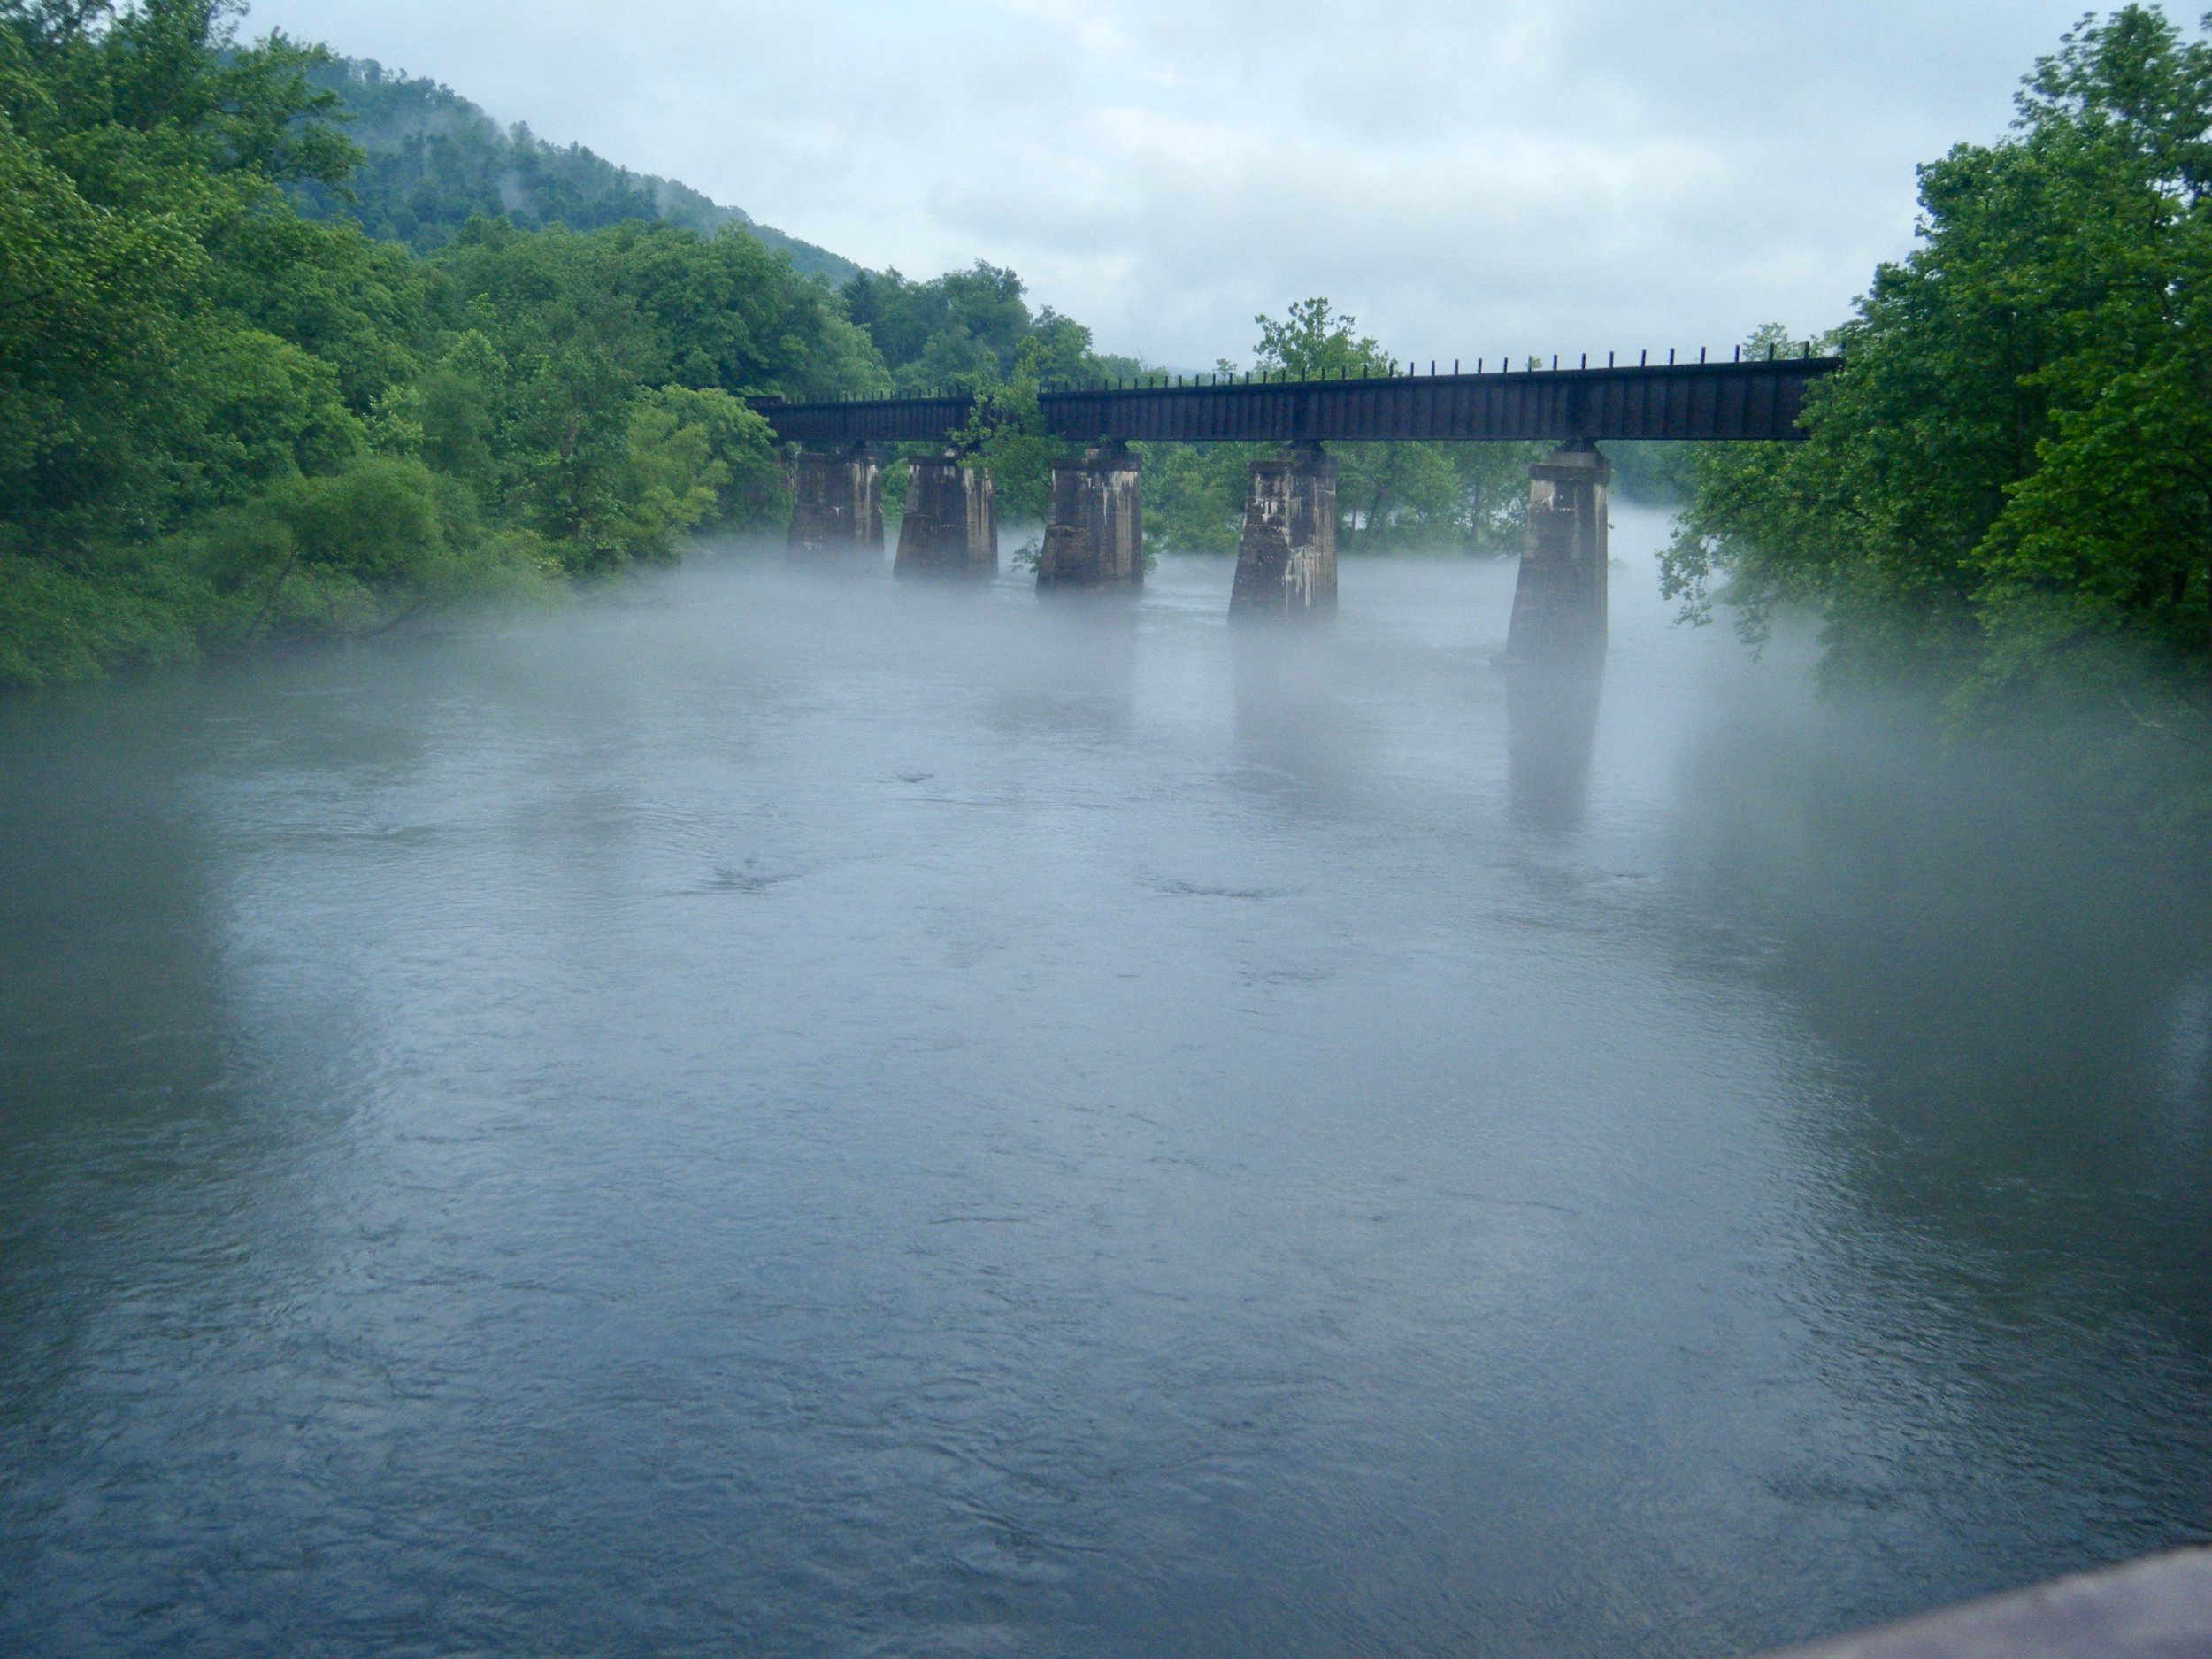 Mist on the Youghiogheny River